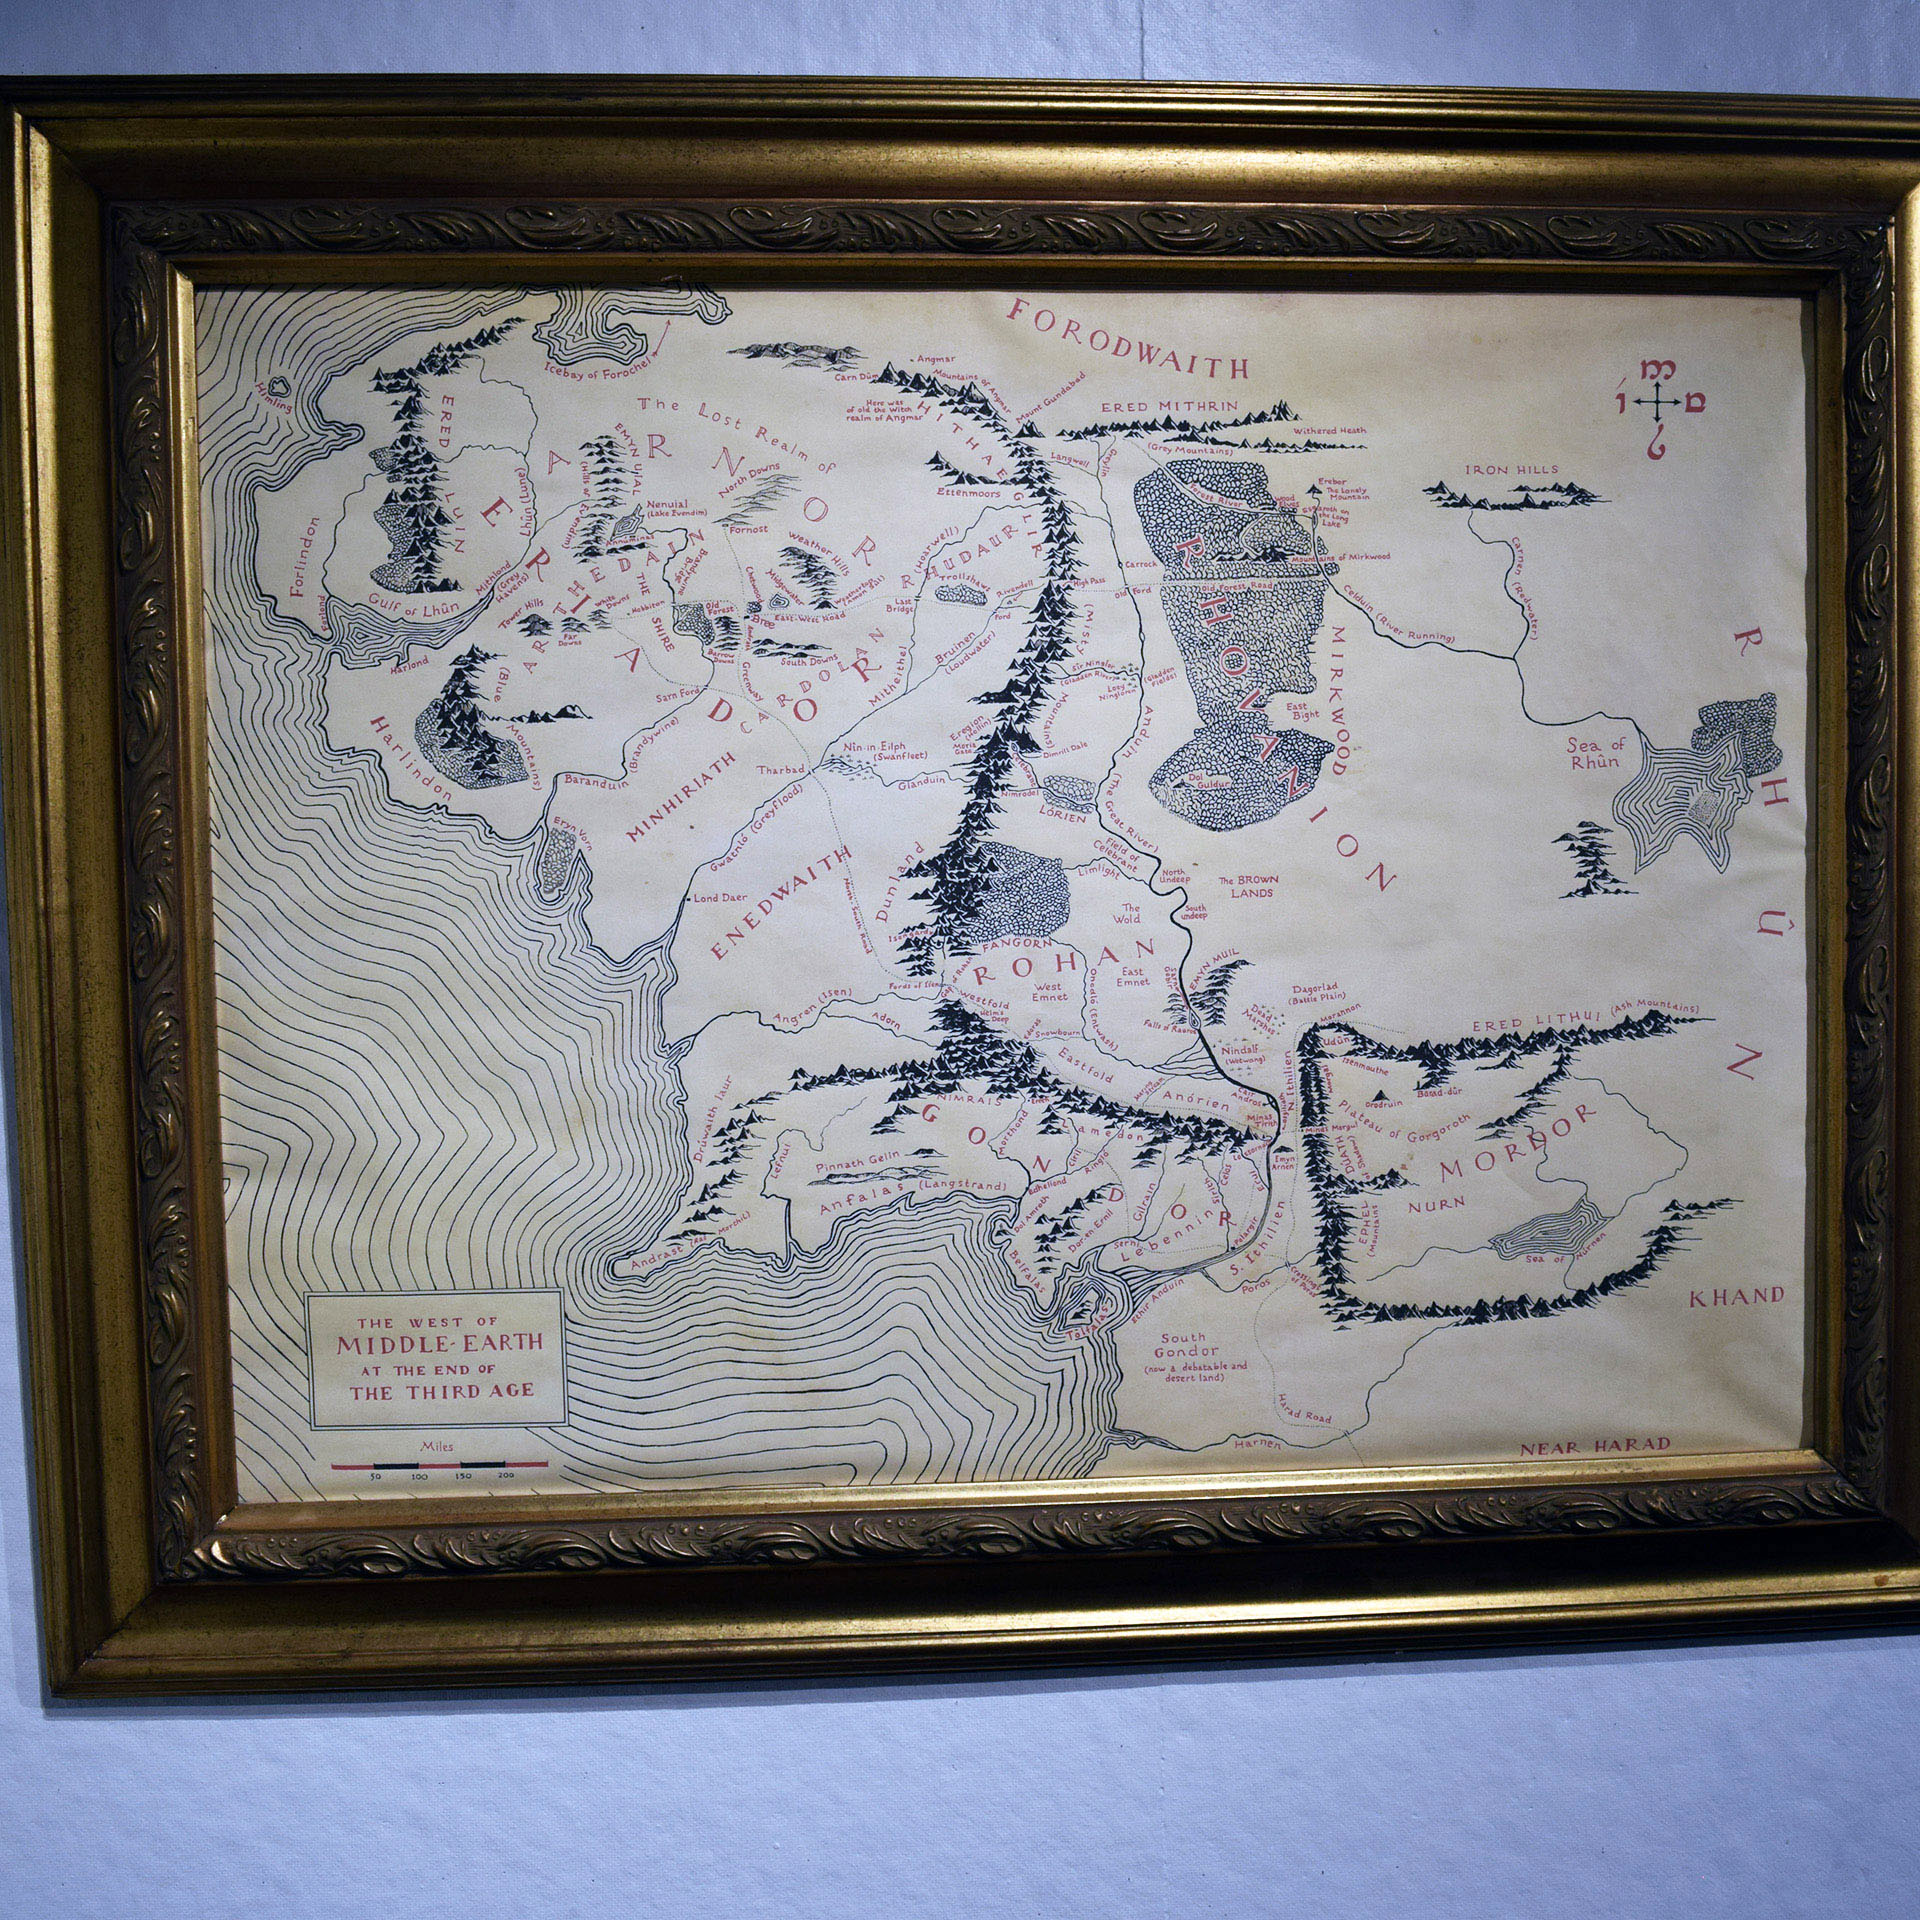 Sam's big Middle Earth map